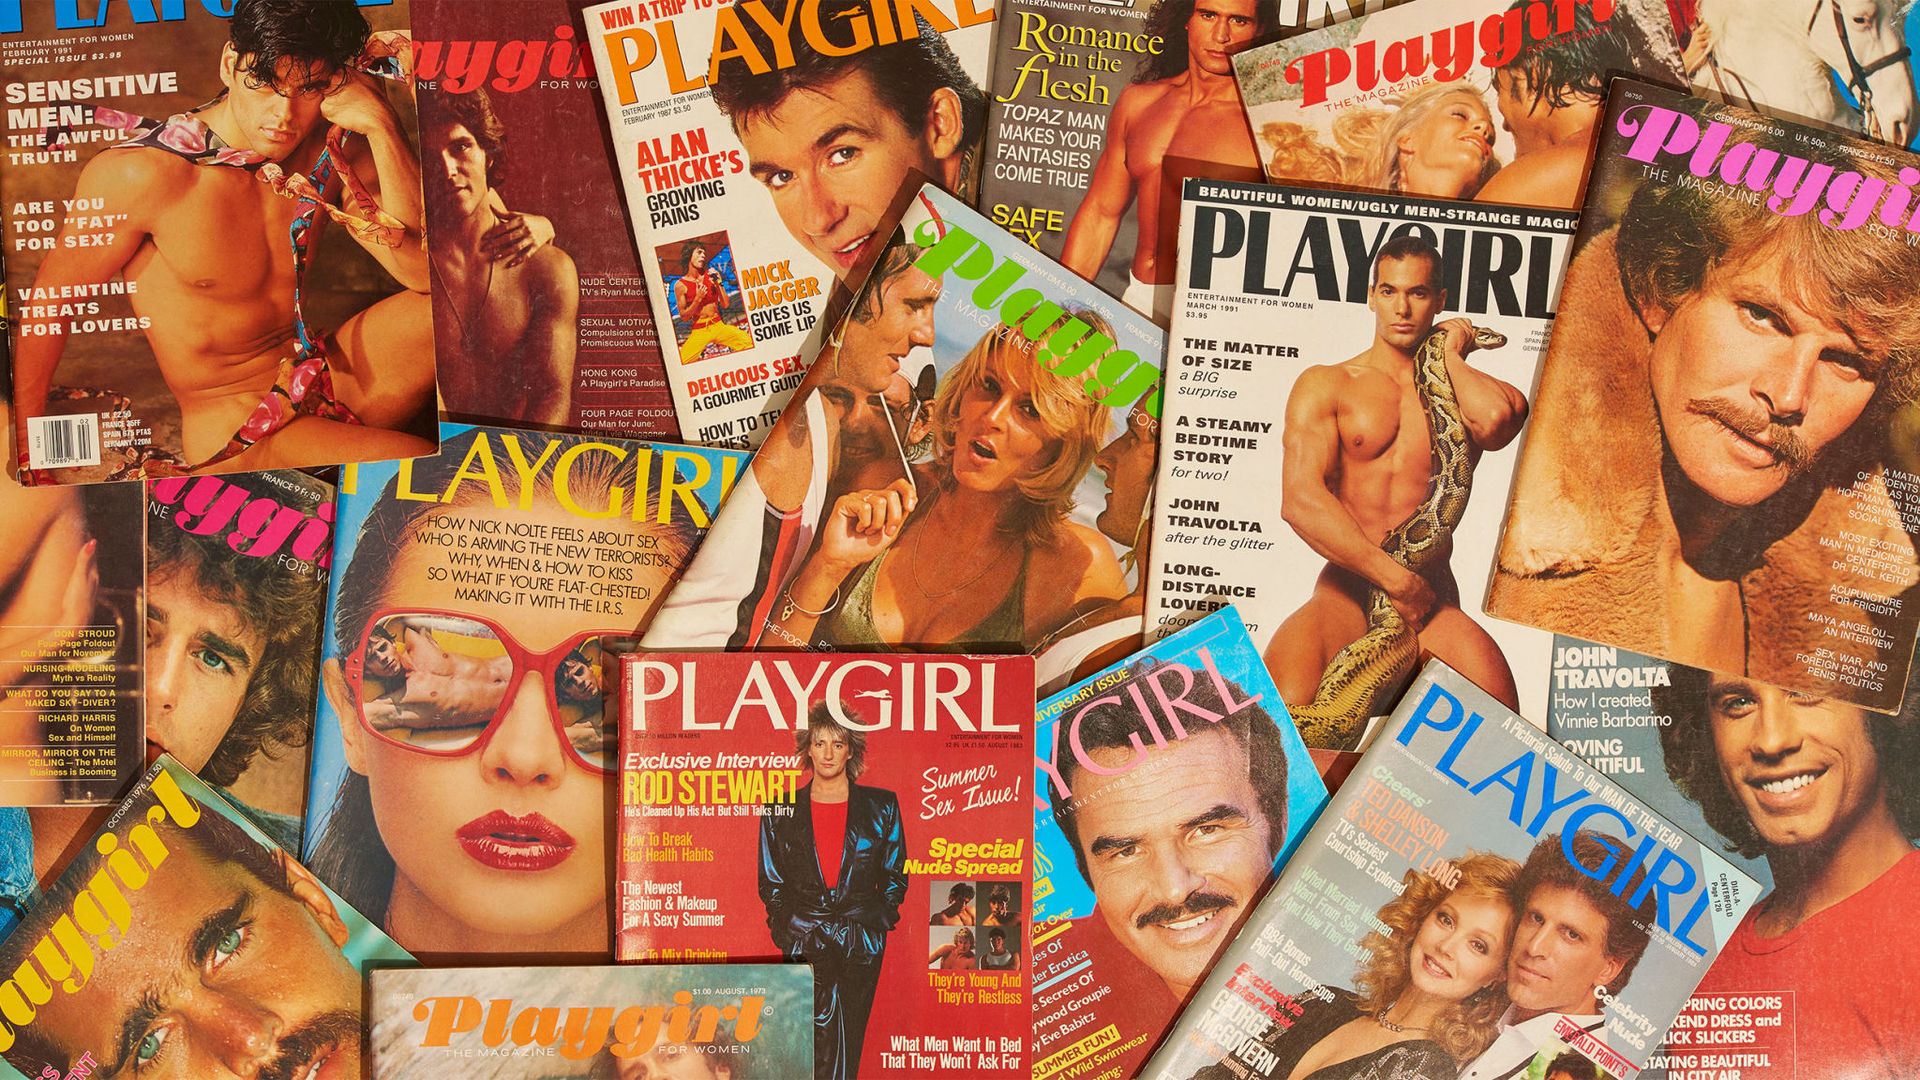 Free Online Sex Magazines - History of Playgirl Magazine - How Playgirl Normalized Male Nudity